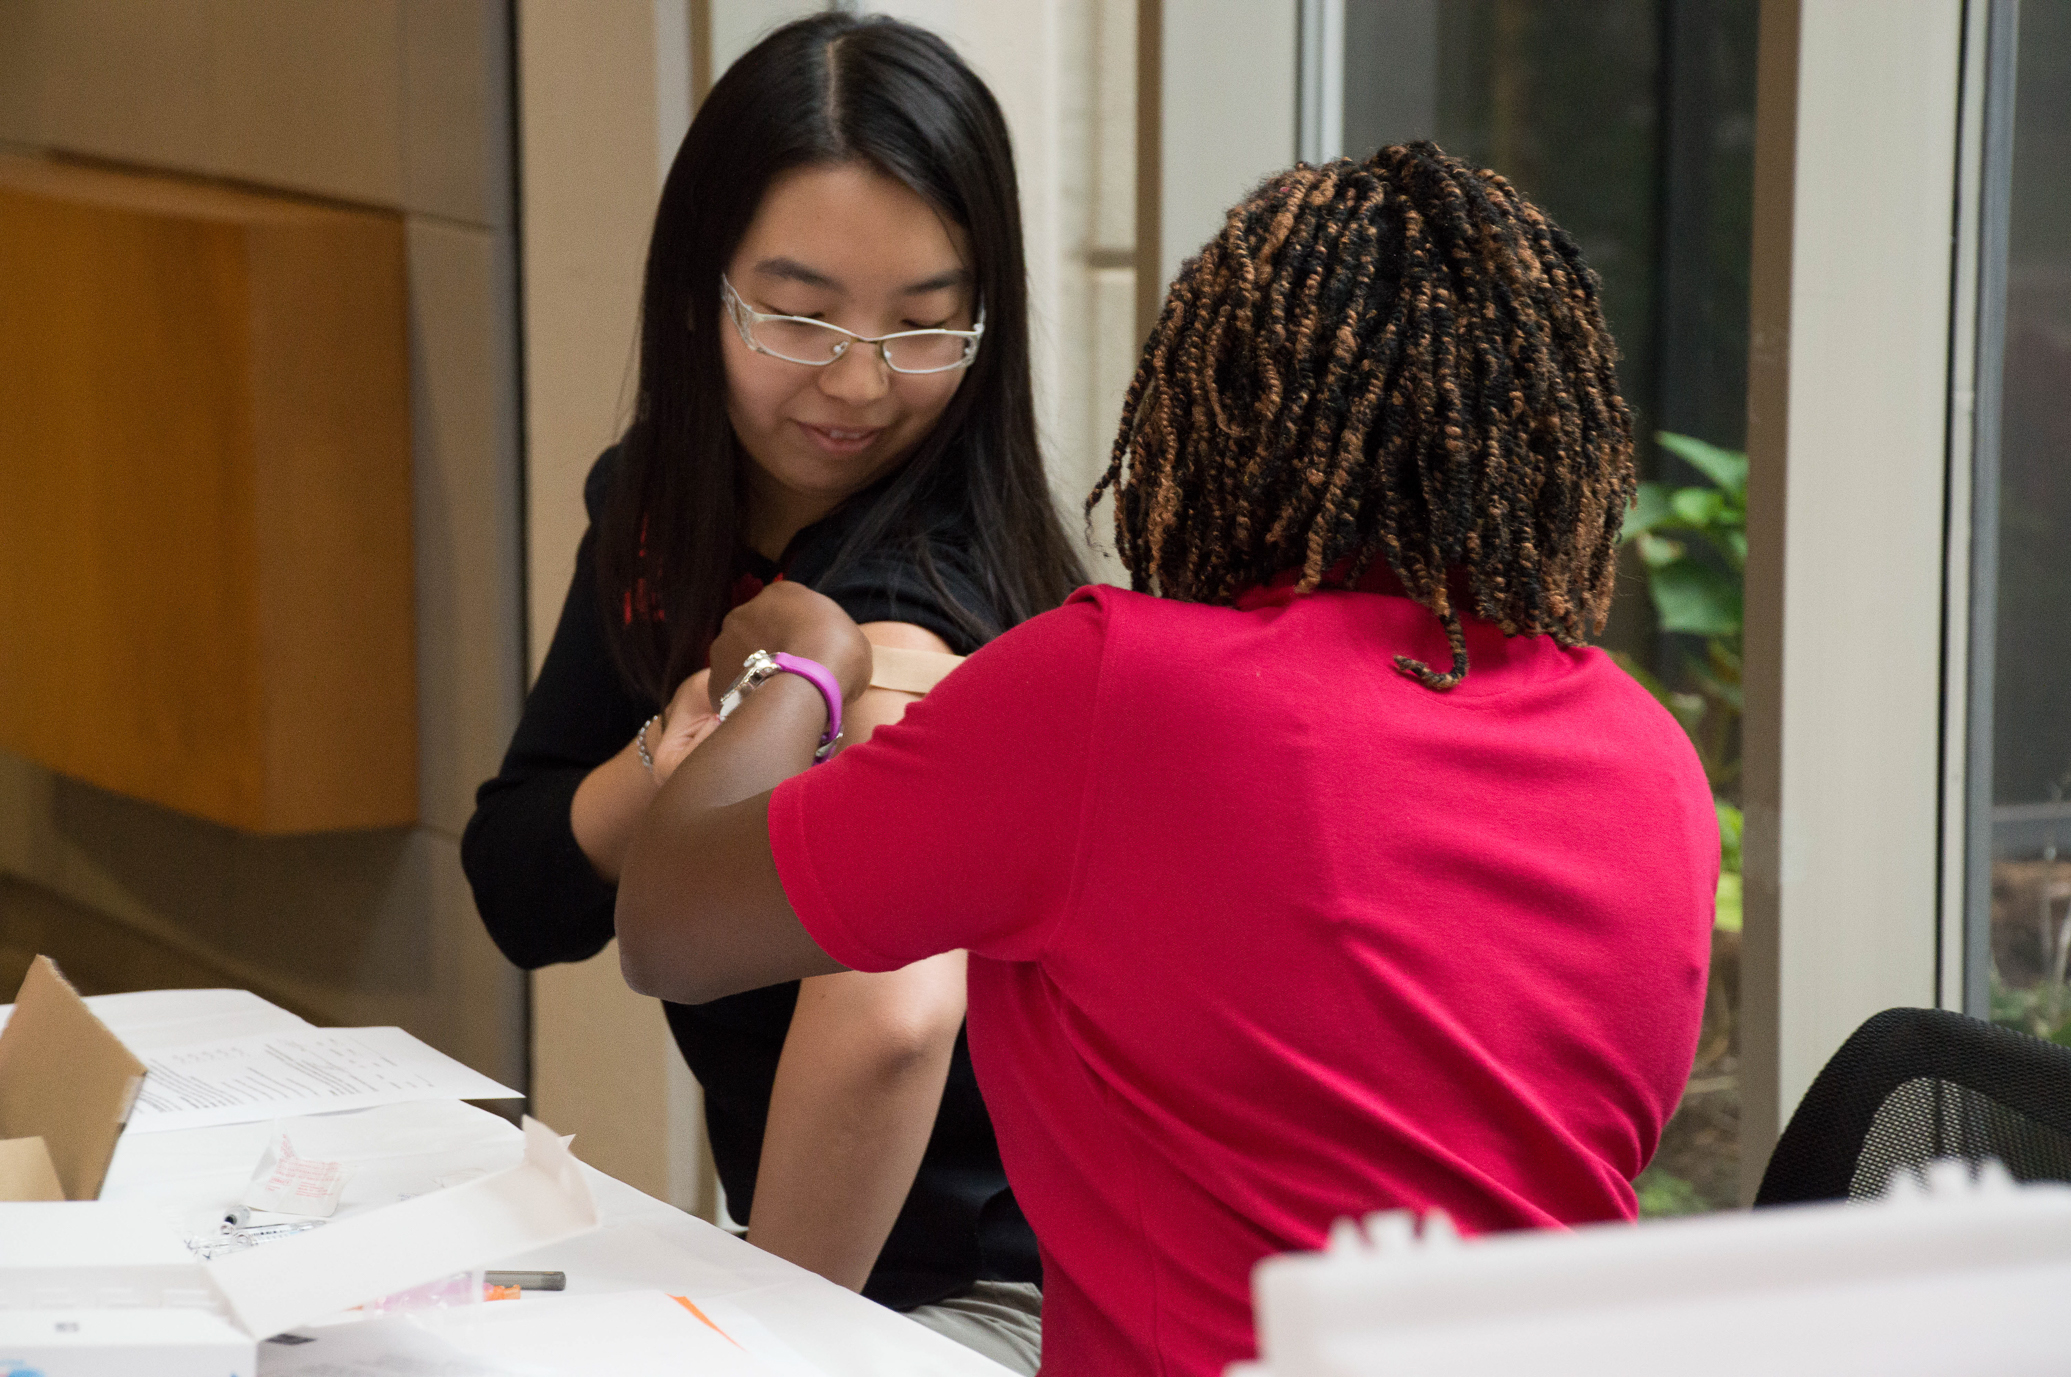 Oklahoma Medical Research Foundation Post-Doctoral Fellow Yao Fu receives her annual flu shot.